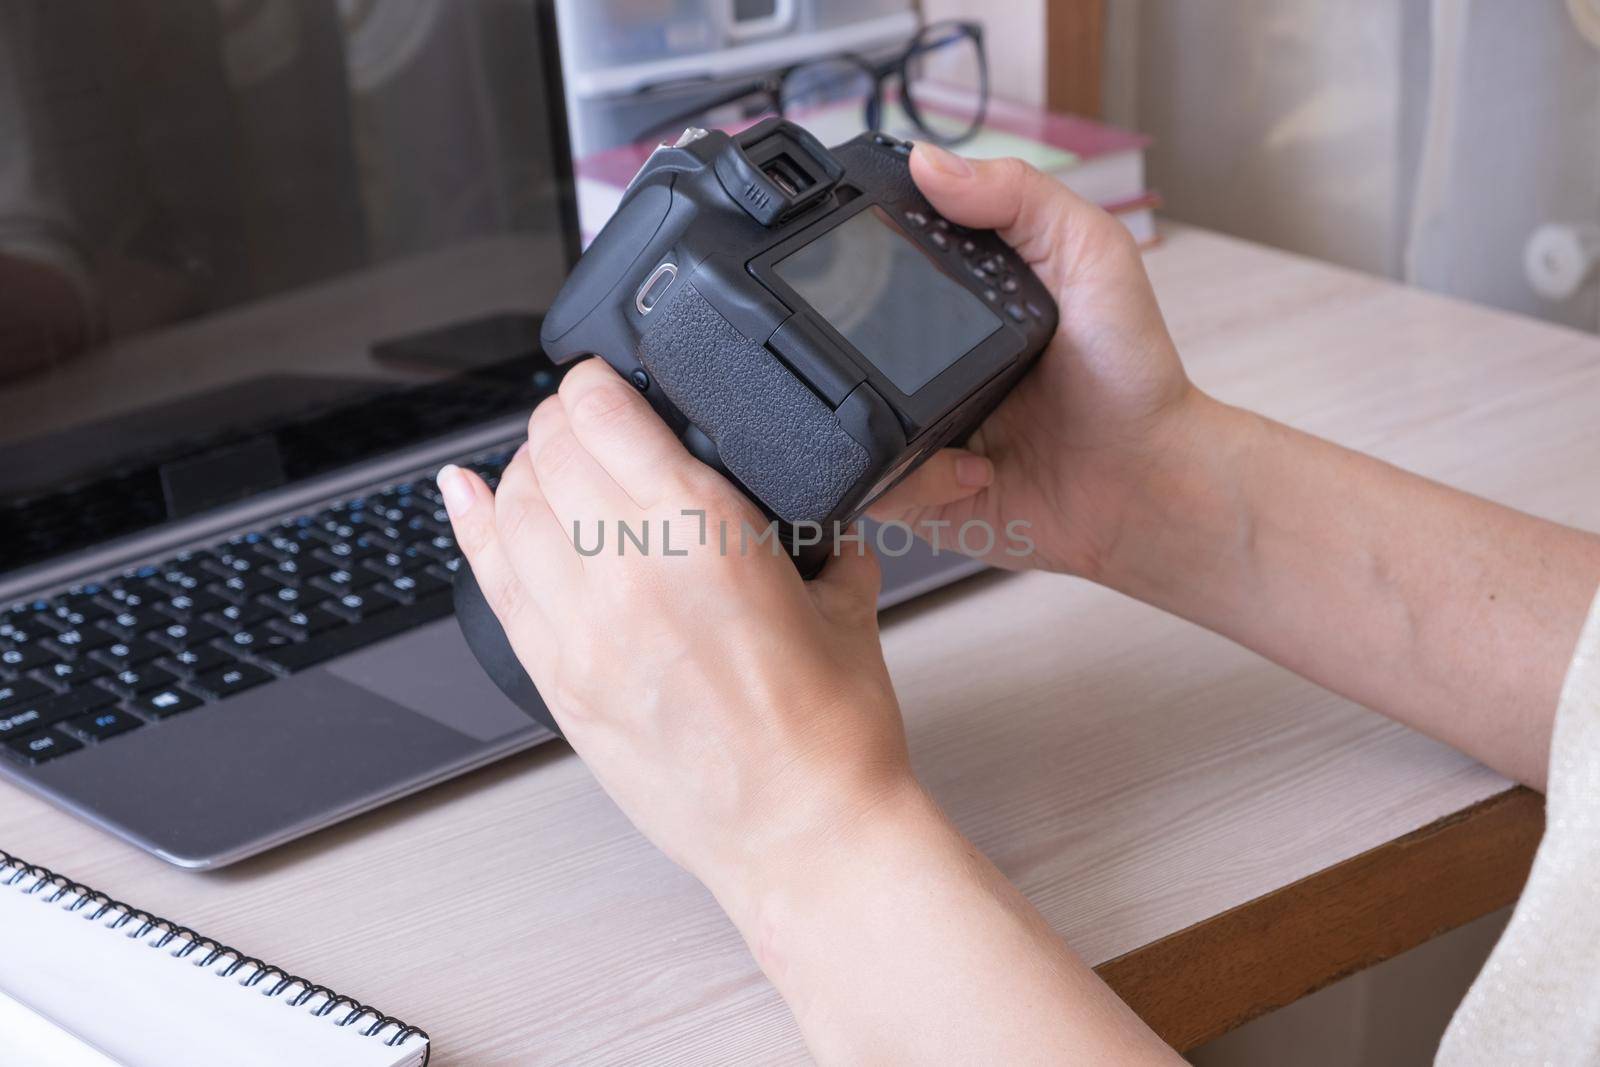 Studying online photography lessons. Female hands holding SLR camera at desktop with laptop.